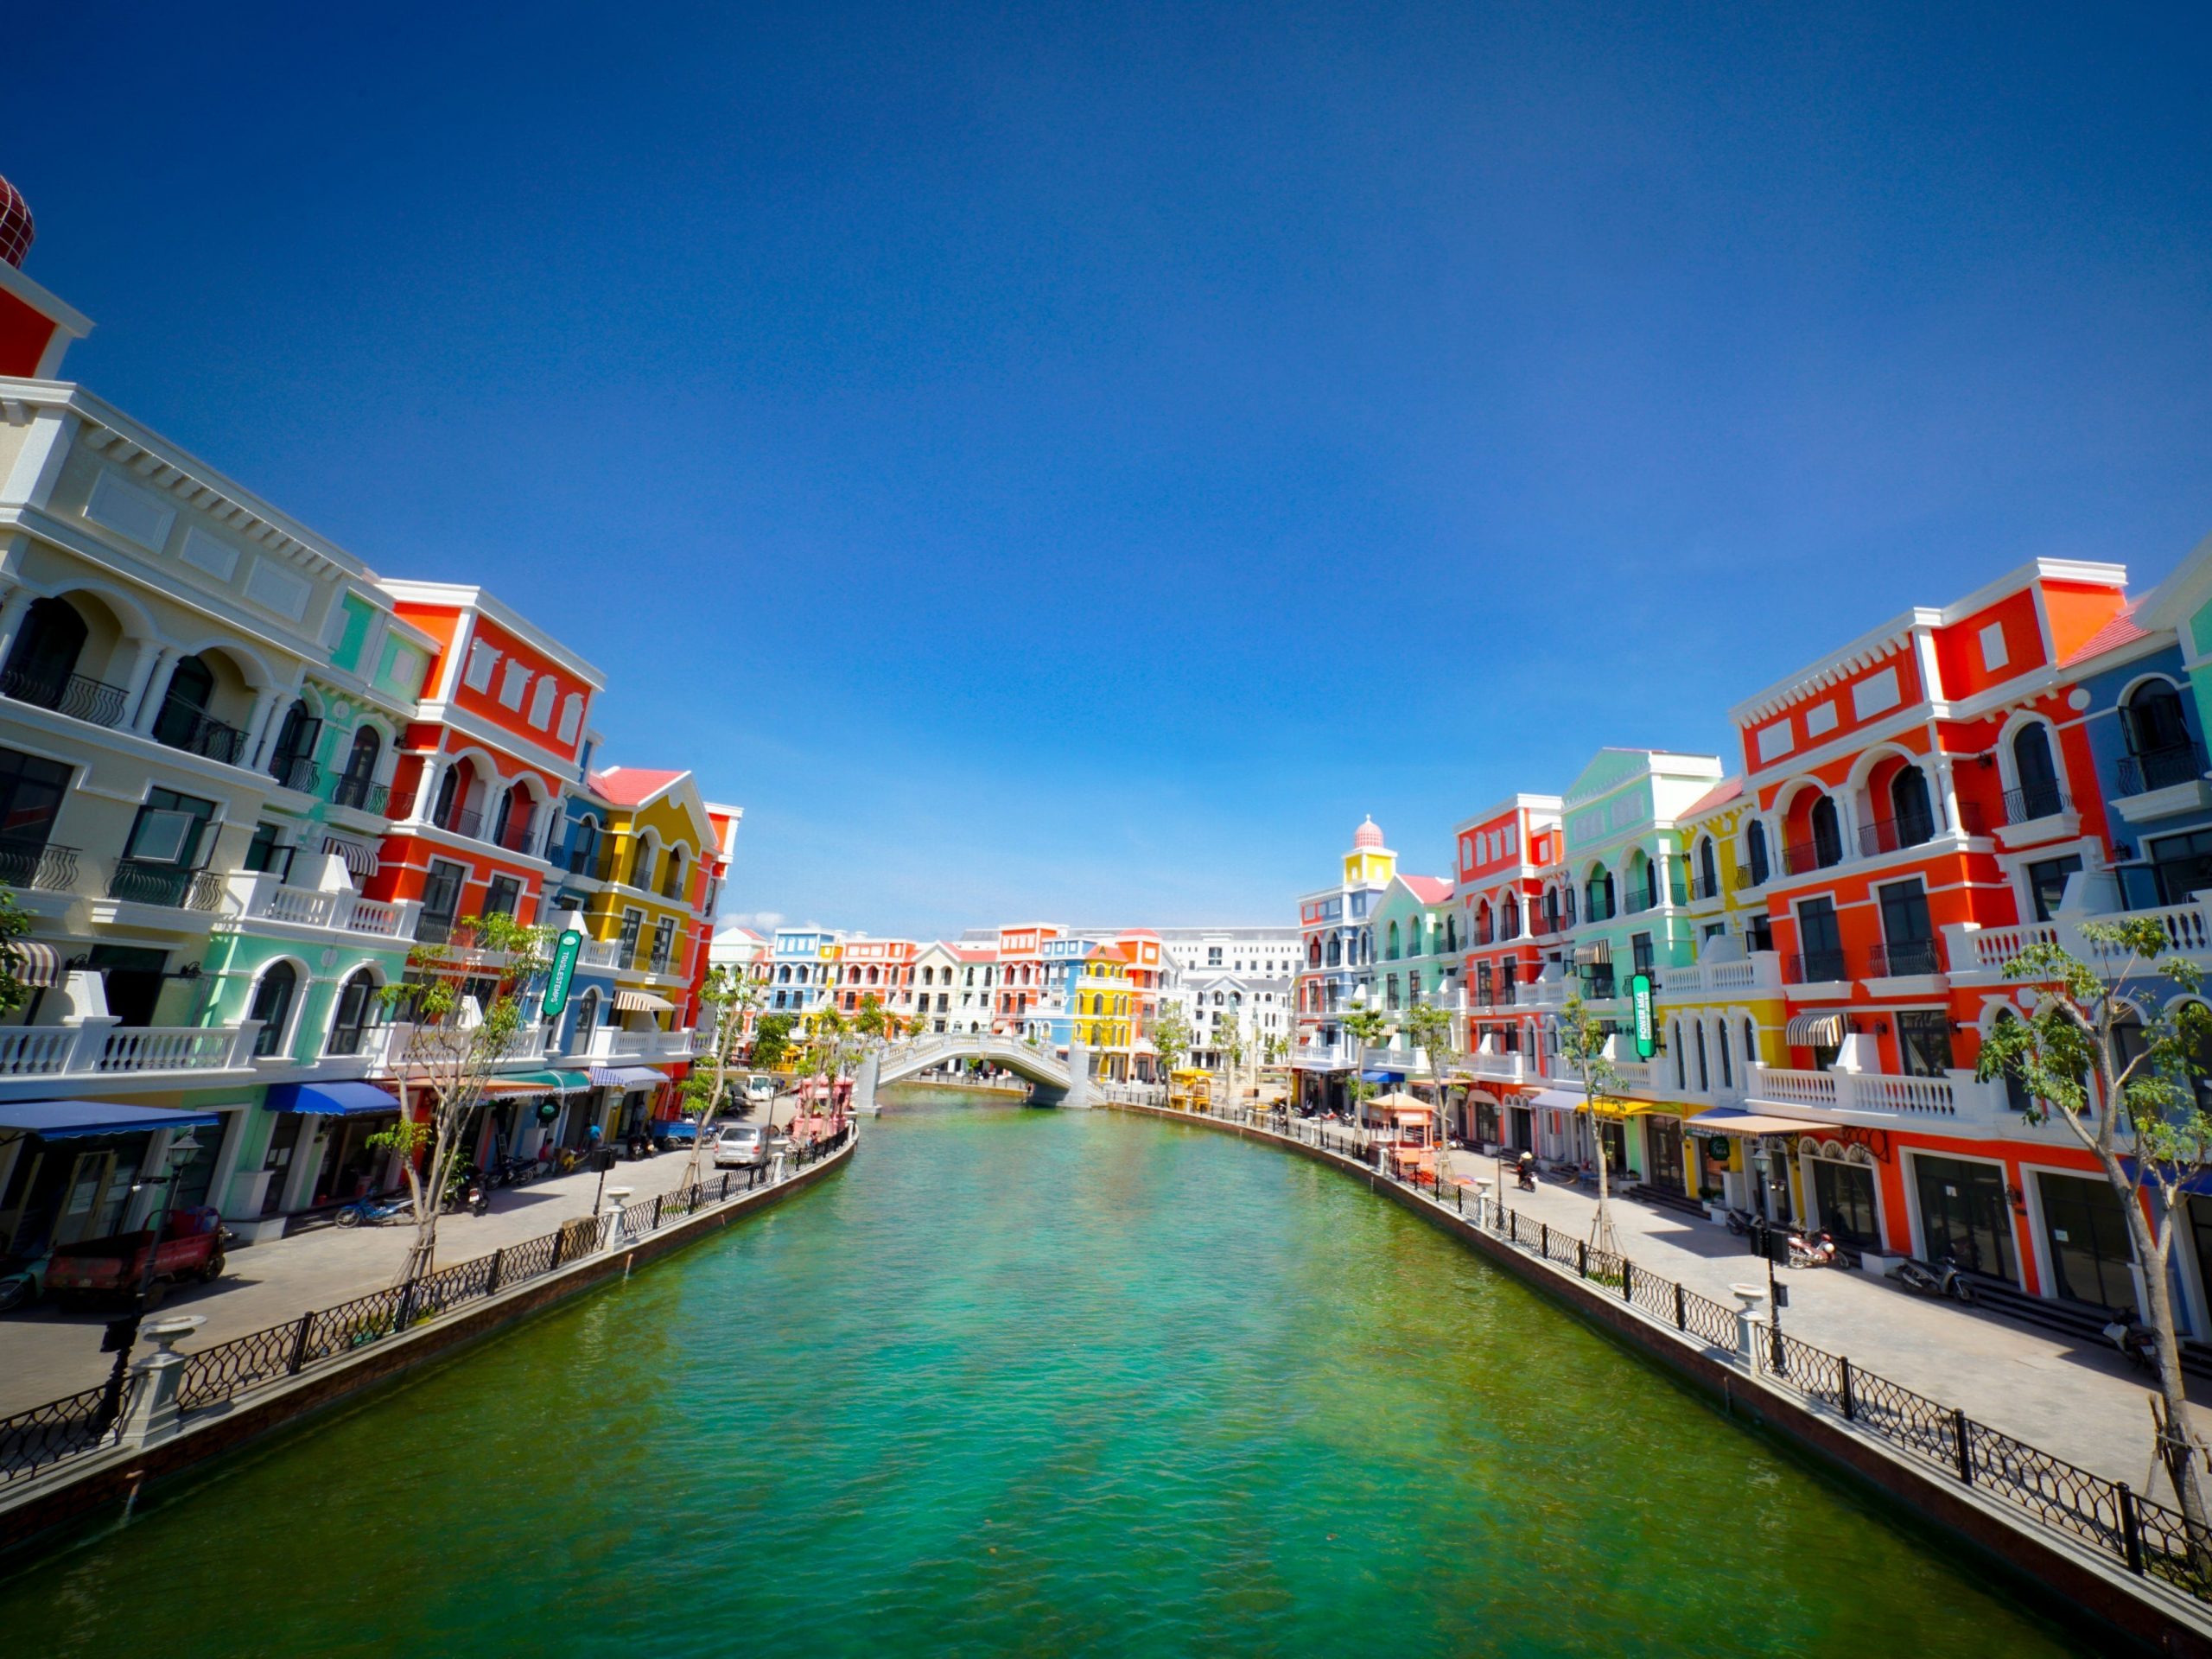 vietnam's fake venetian canal is lined with colorful buildings